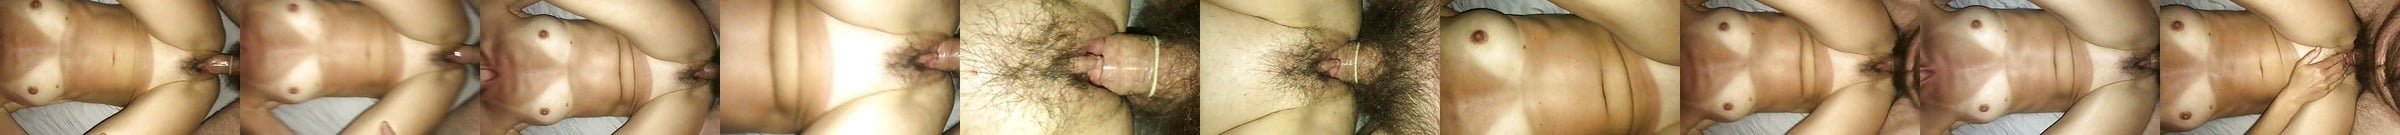 Meaty Tight N Hairy Cunt Rides Thick Stiff N Furry Cock Xhamster